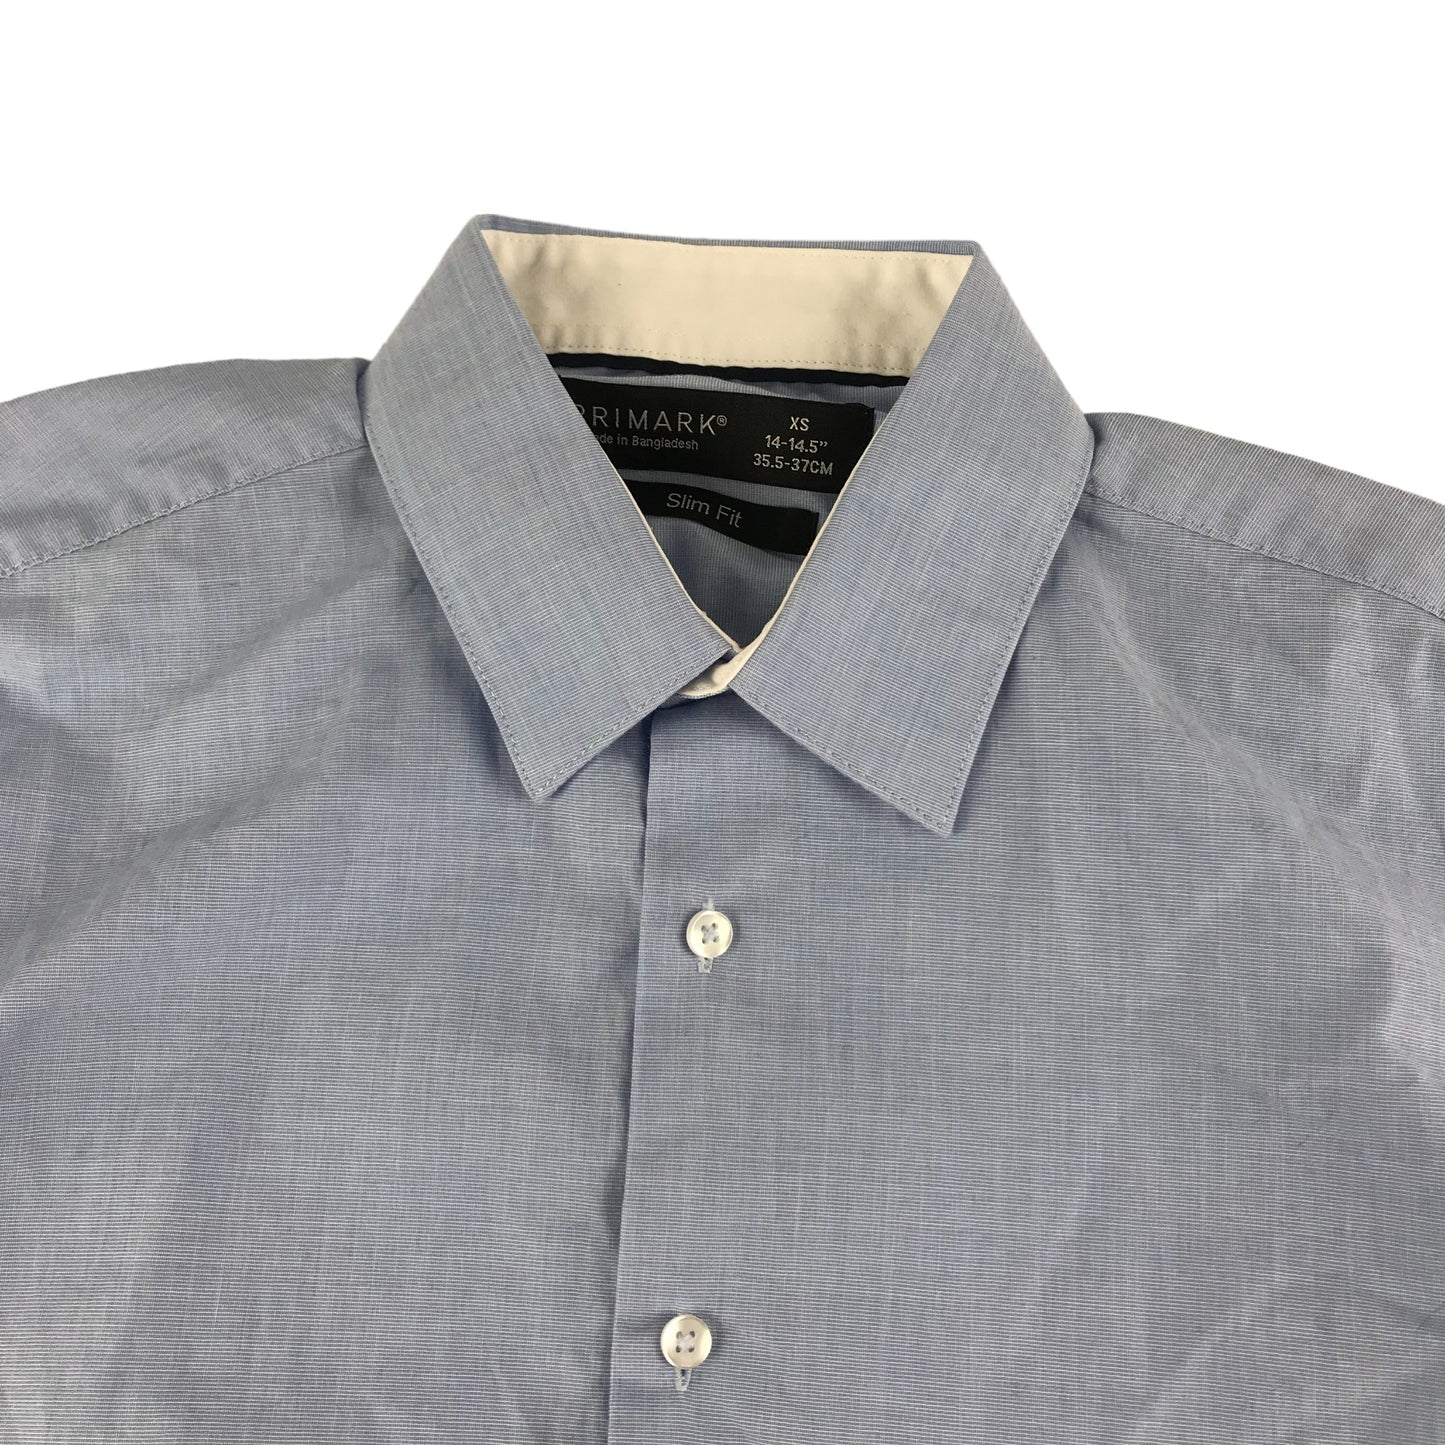 Primark Shirt Size XS Light Blue 14-15.5in Collar Slim Fit Button Up Cotton